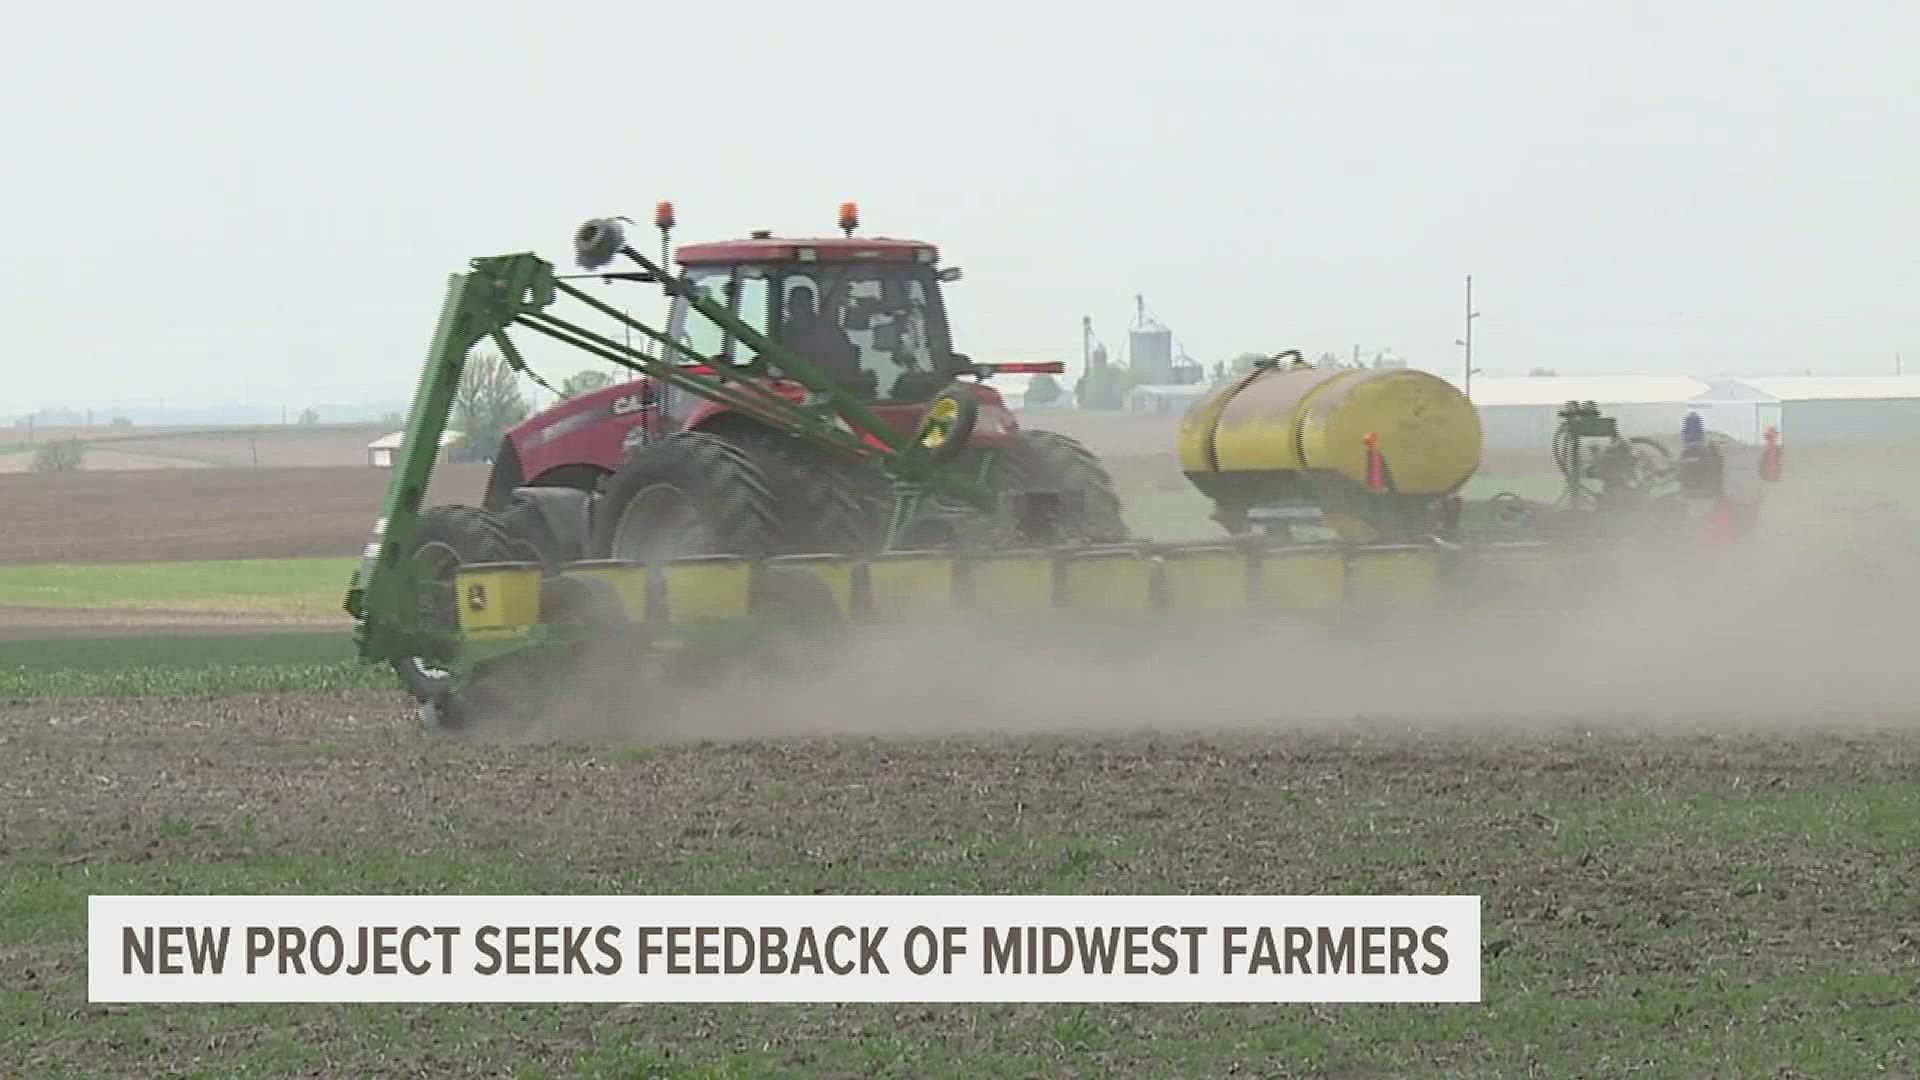 The research project, supported by the USDA and many Midwestern institutions, wants to know what's working and not working for Midwestern farmers.